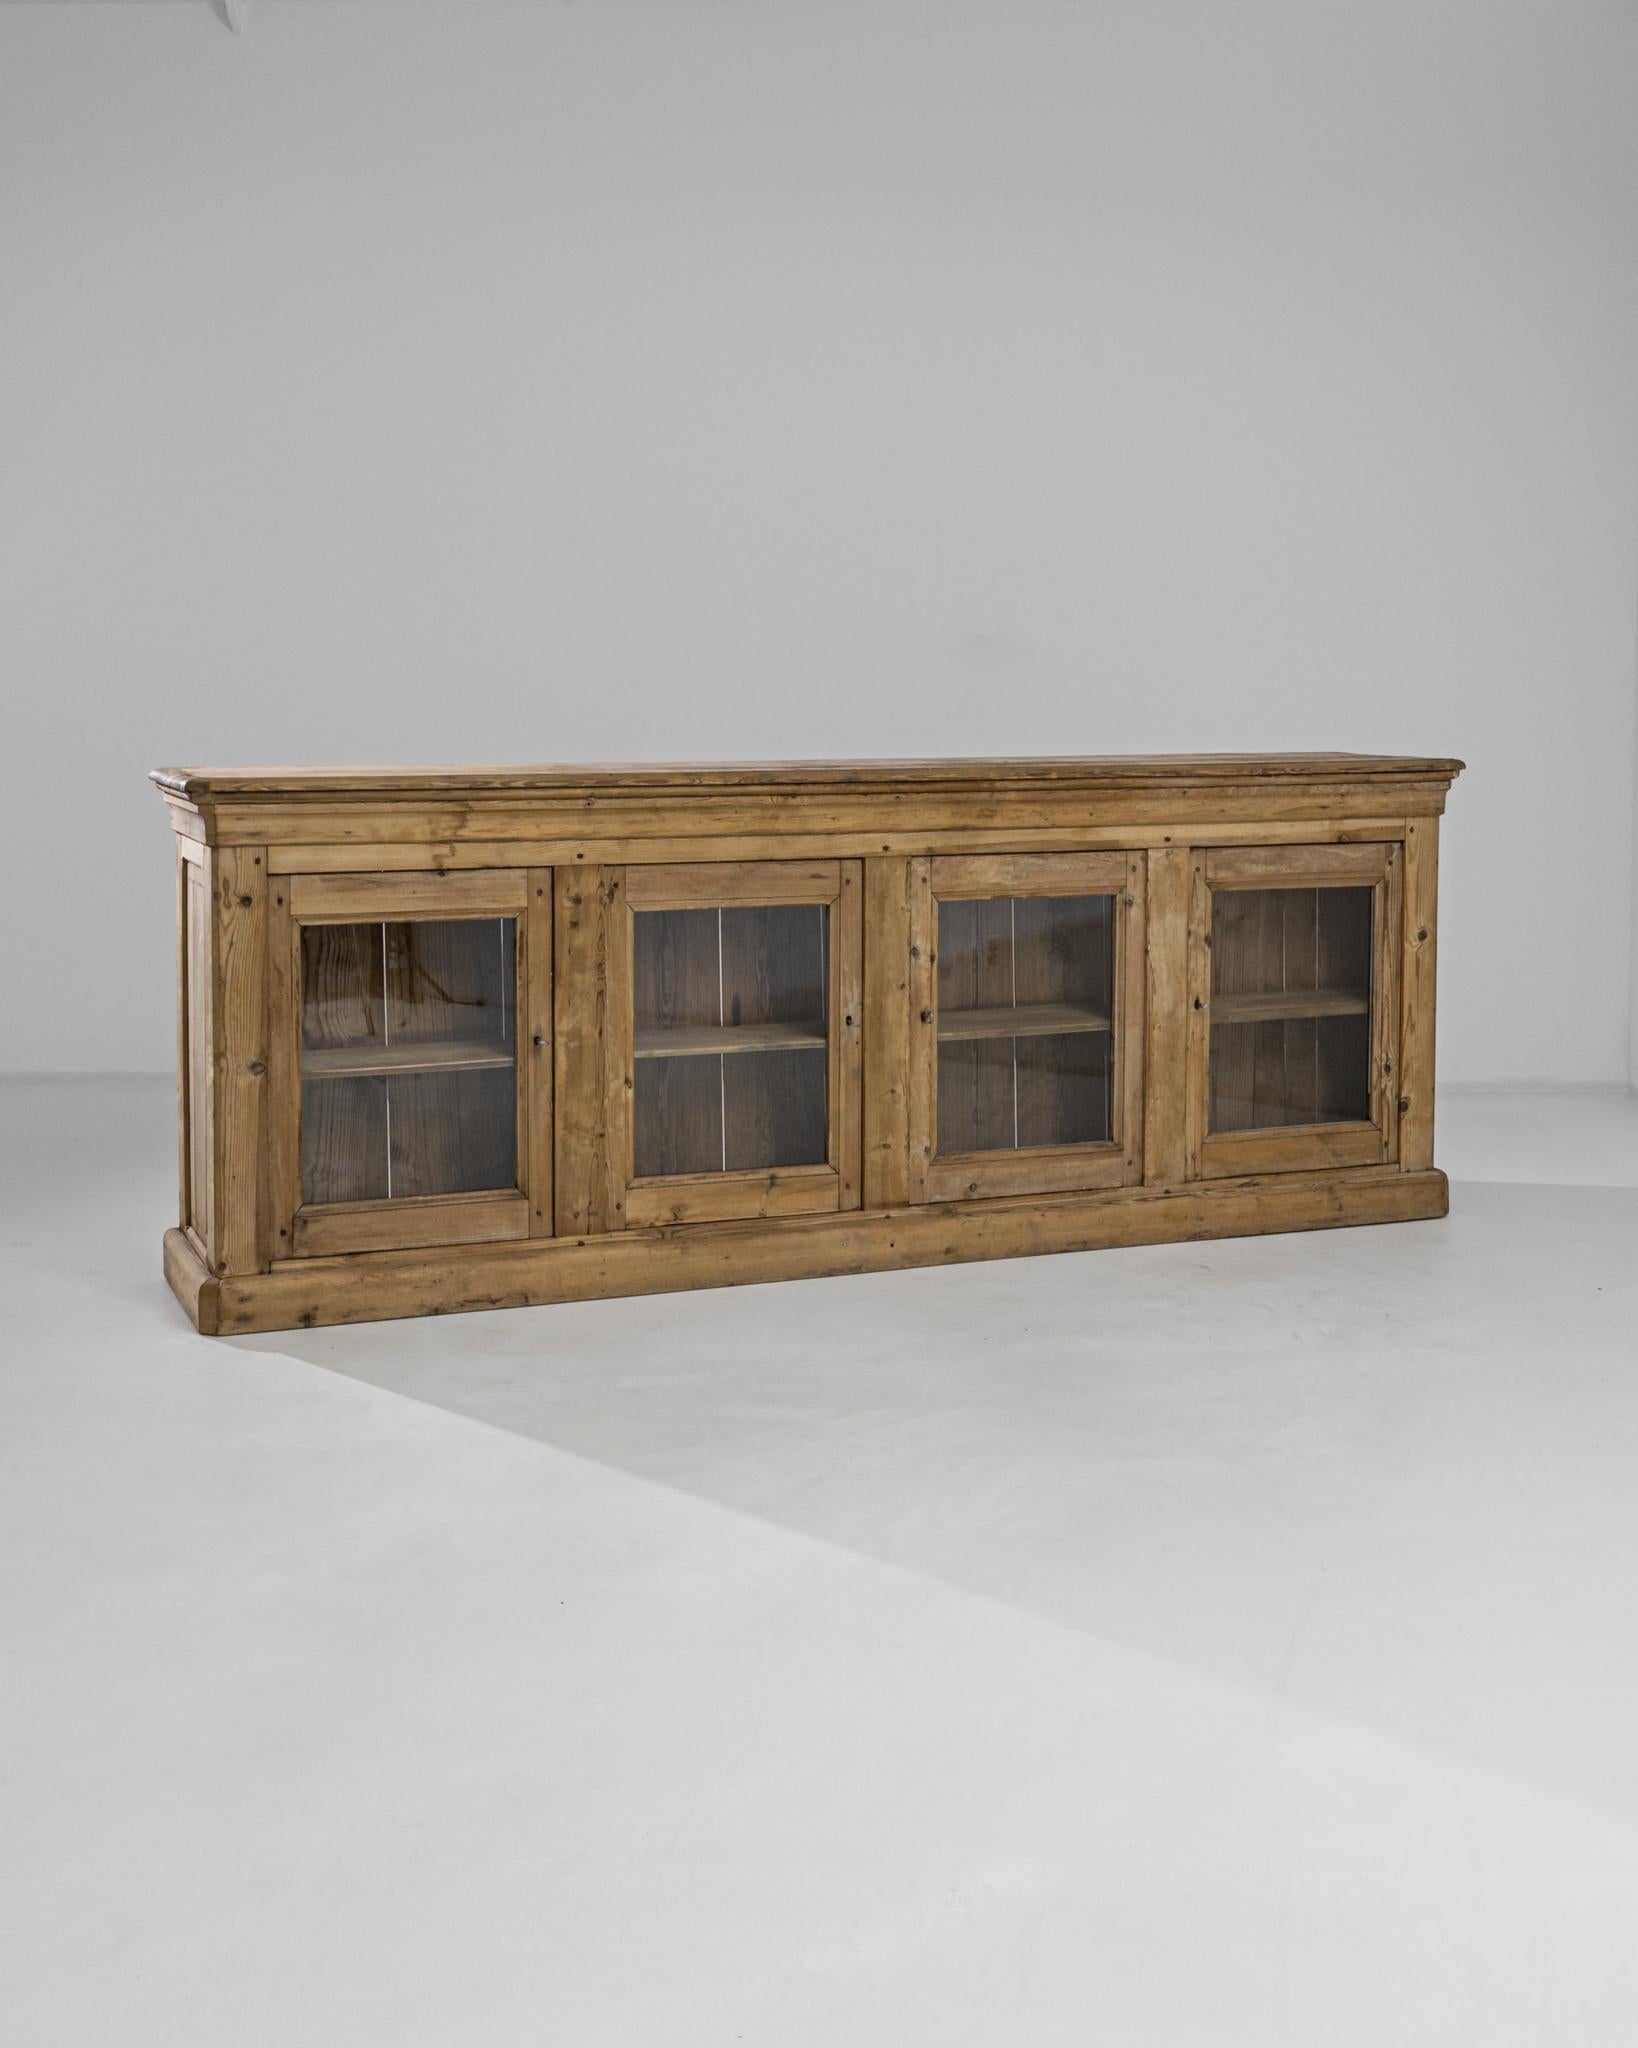 This horizontal vitrine was produced in France, circa 1880. Actualized with new glass panels, this antique vitrine exhibits a beveled top and a spacious two shelves case with locks. The beautifully preserved wood displays a honeycomb shade and a